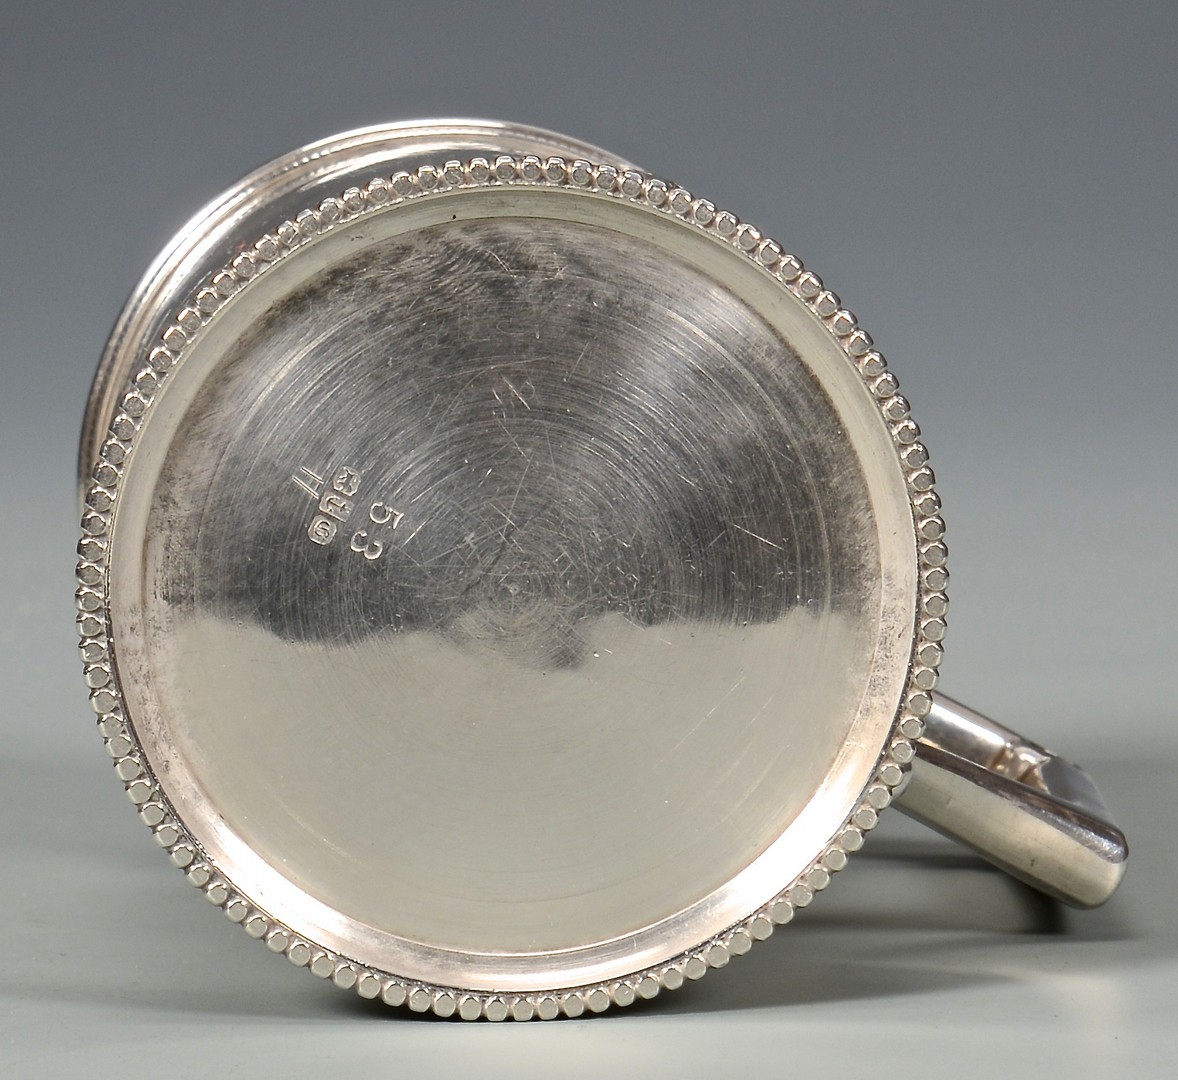 Lot 50: Medallion Cup and Jaccard Creamer, coin silver